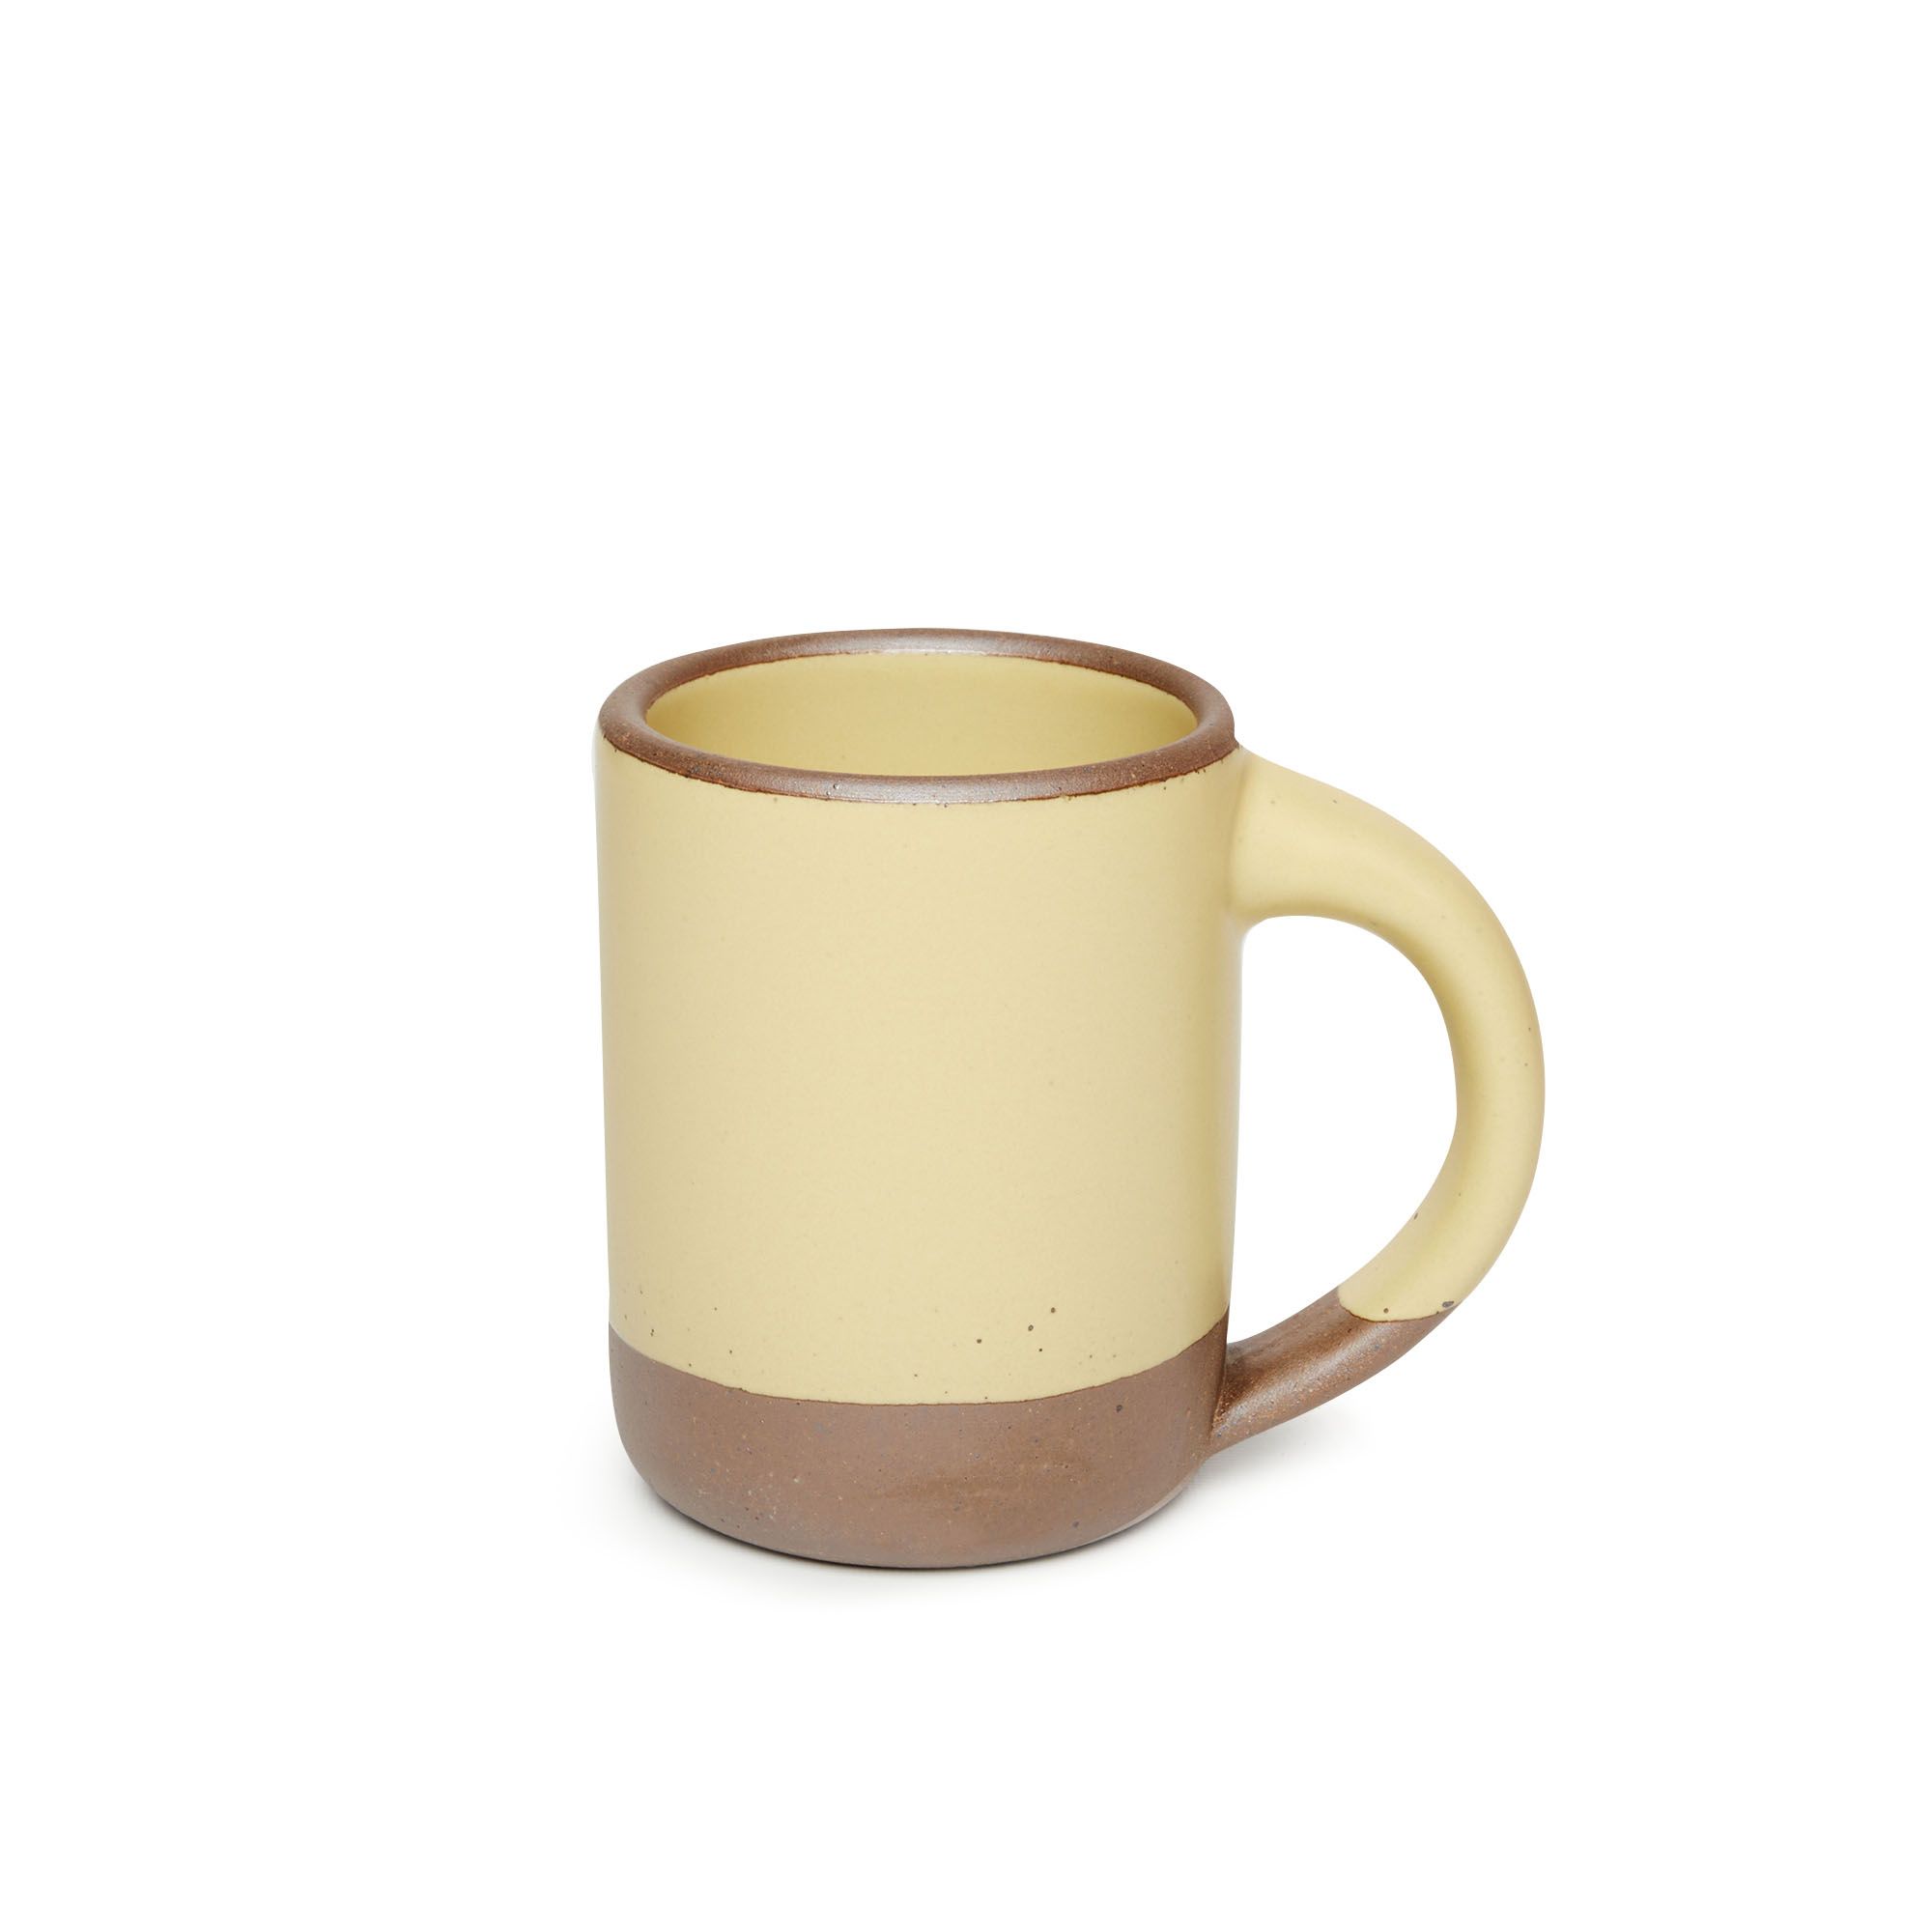 A medium sized ceramic mug with handle in a light butter yellow color featuring iron speckles and unglazed rim and bottom base.